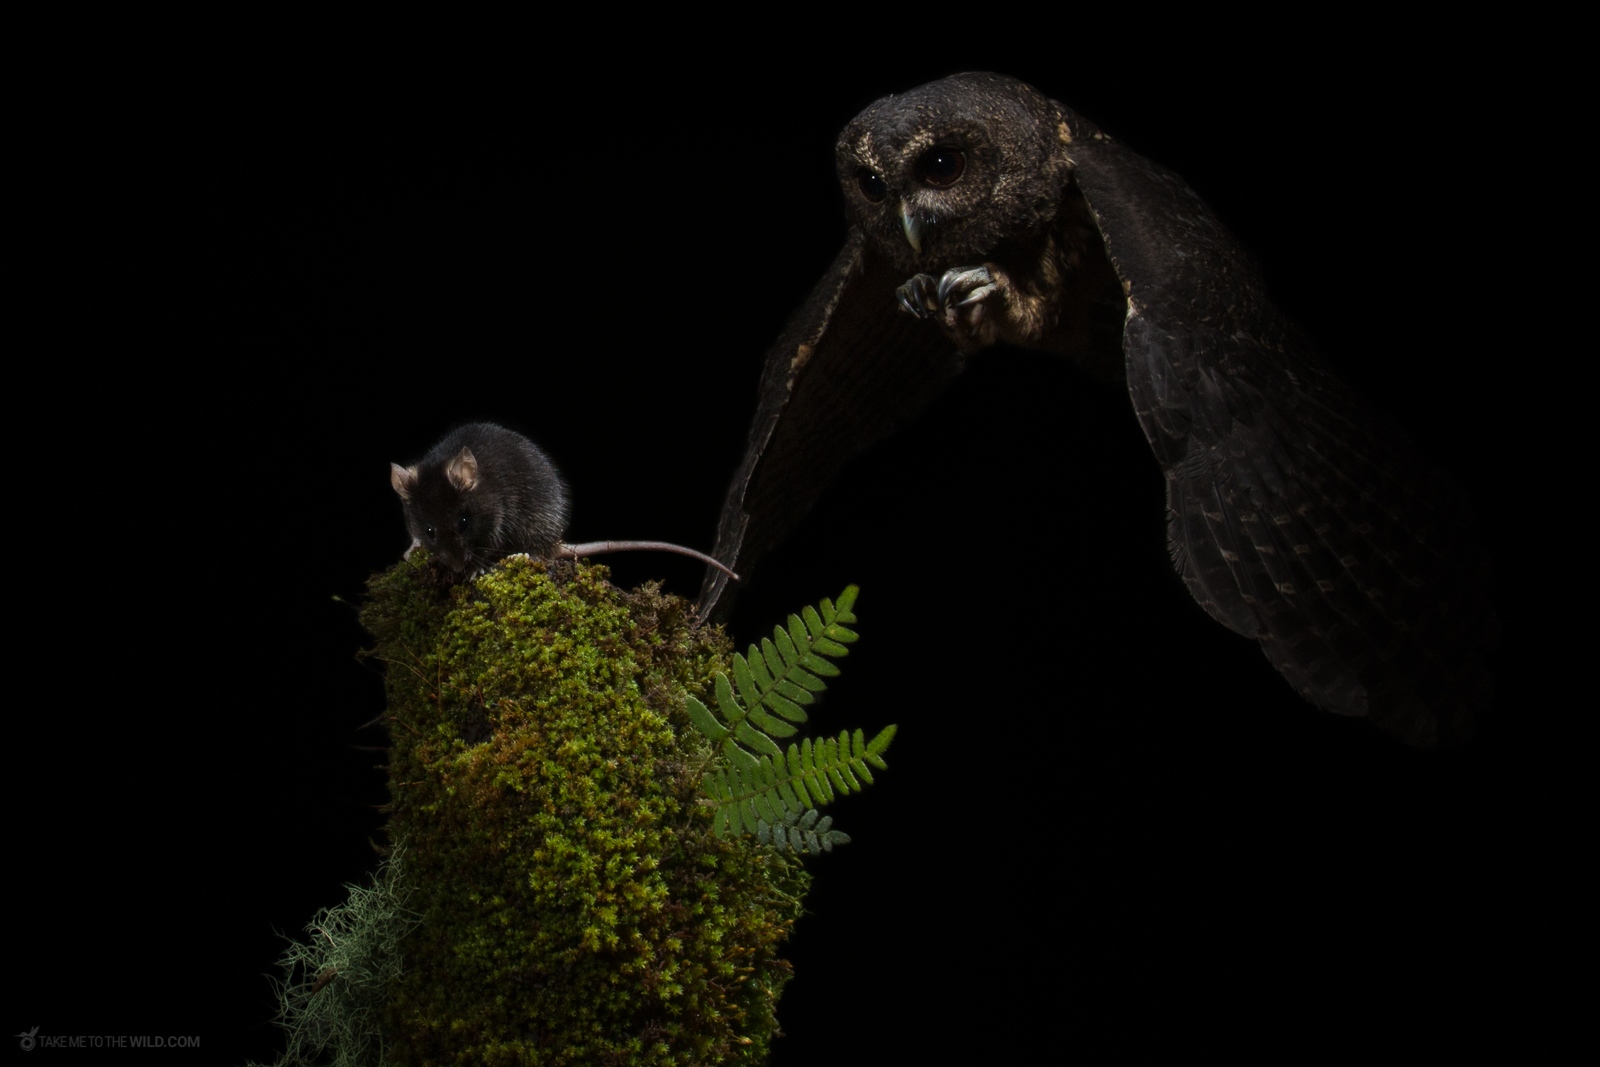 Mottled Owl (Ciccaba virgata) hunting at night in the highlands of Costa Rica.